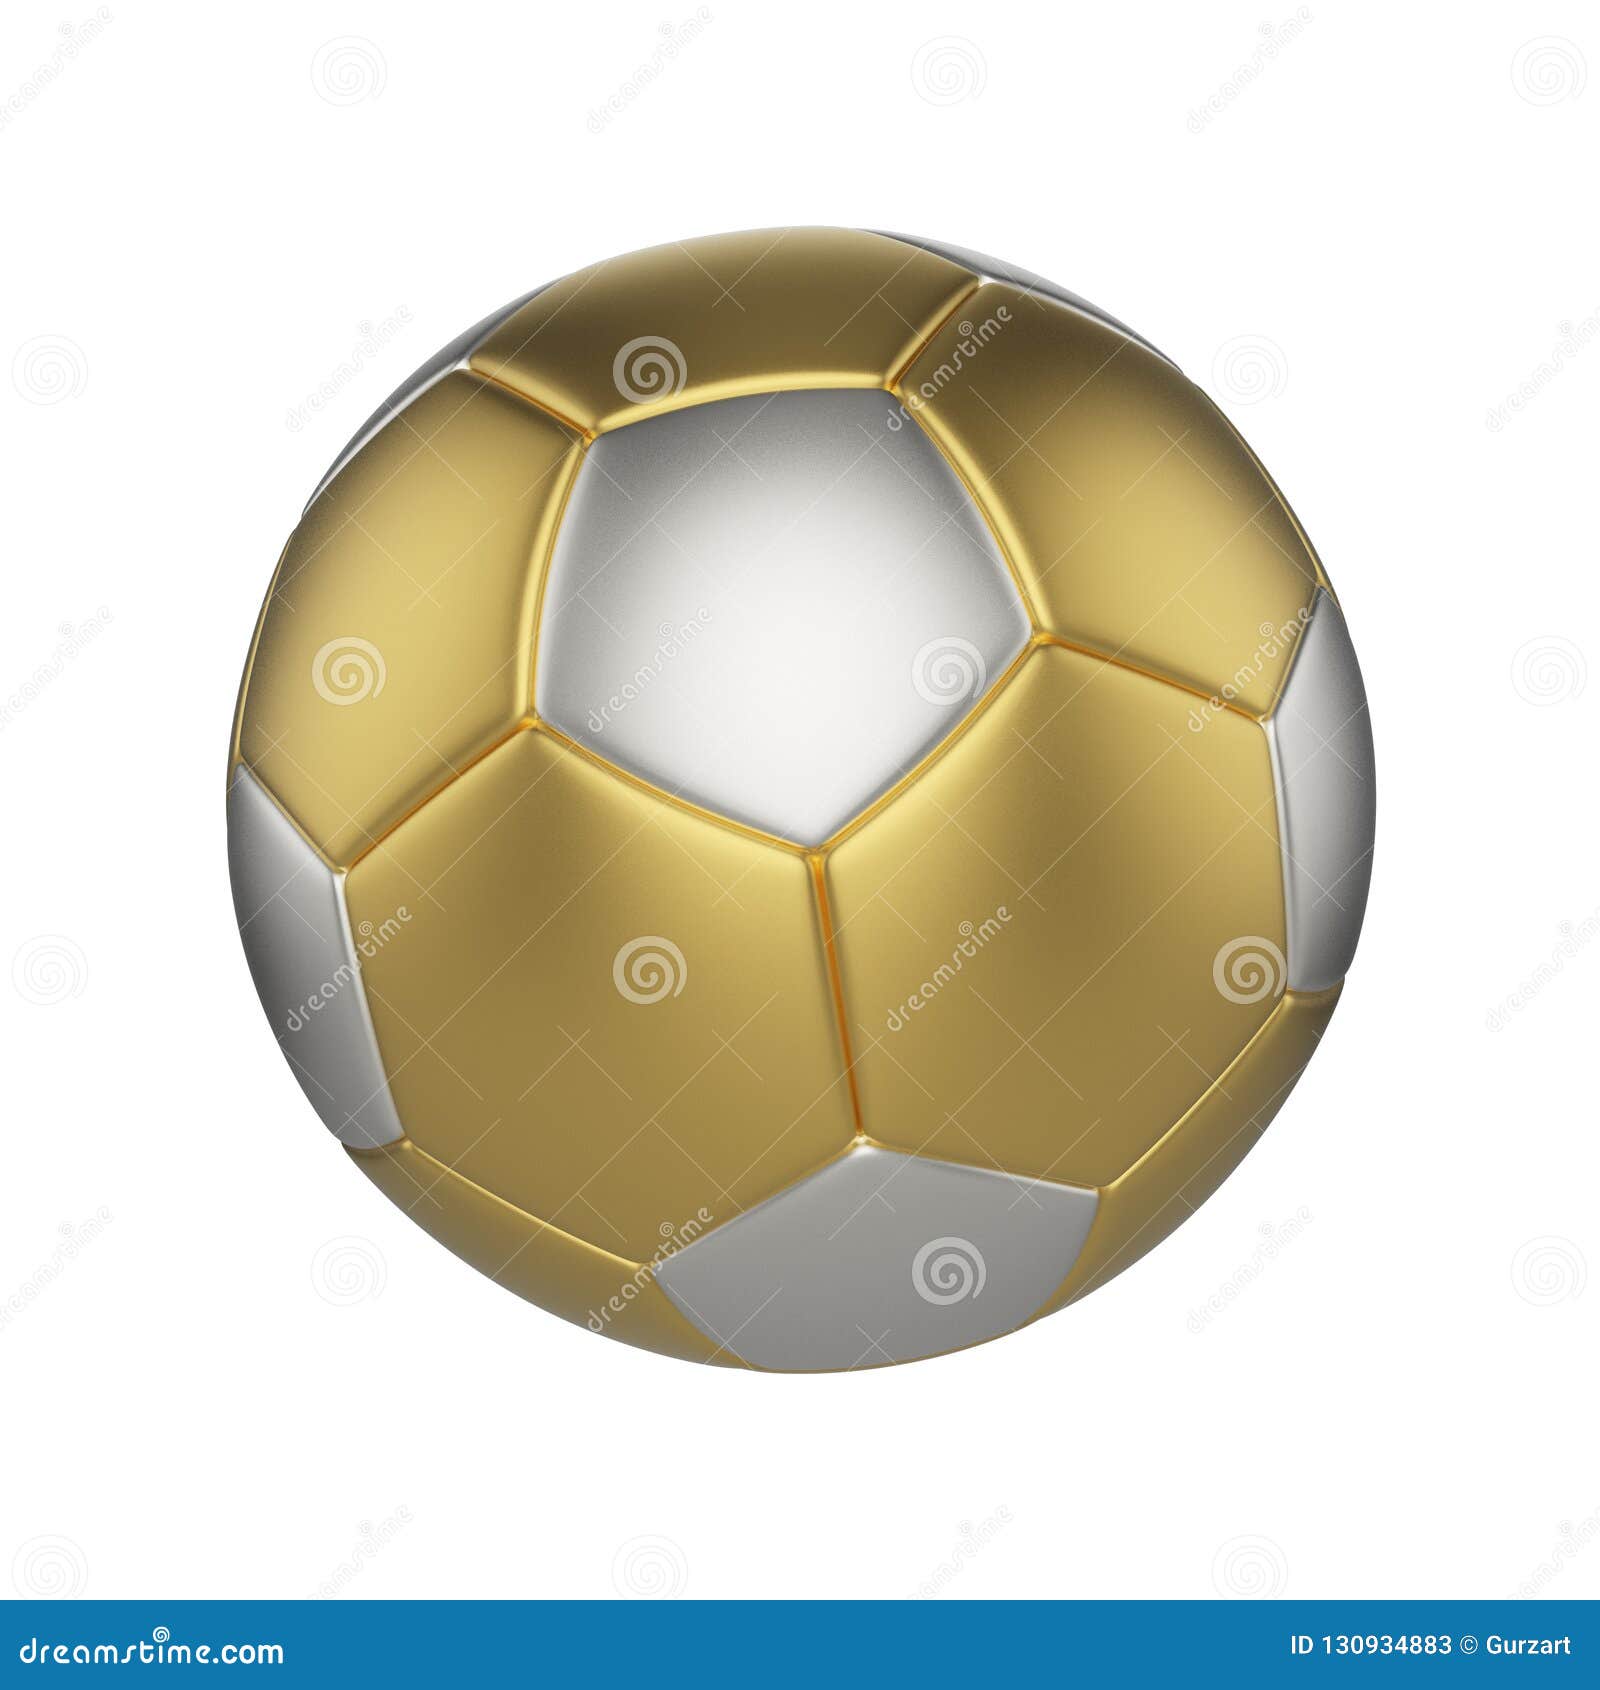 Soccer Ball Isolated on White Background. Gold and Silver Football Ball ...